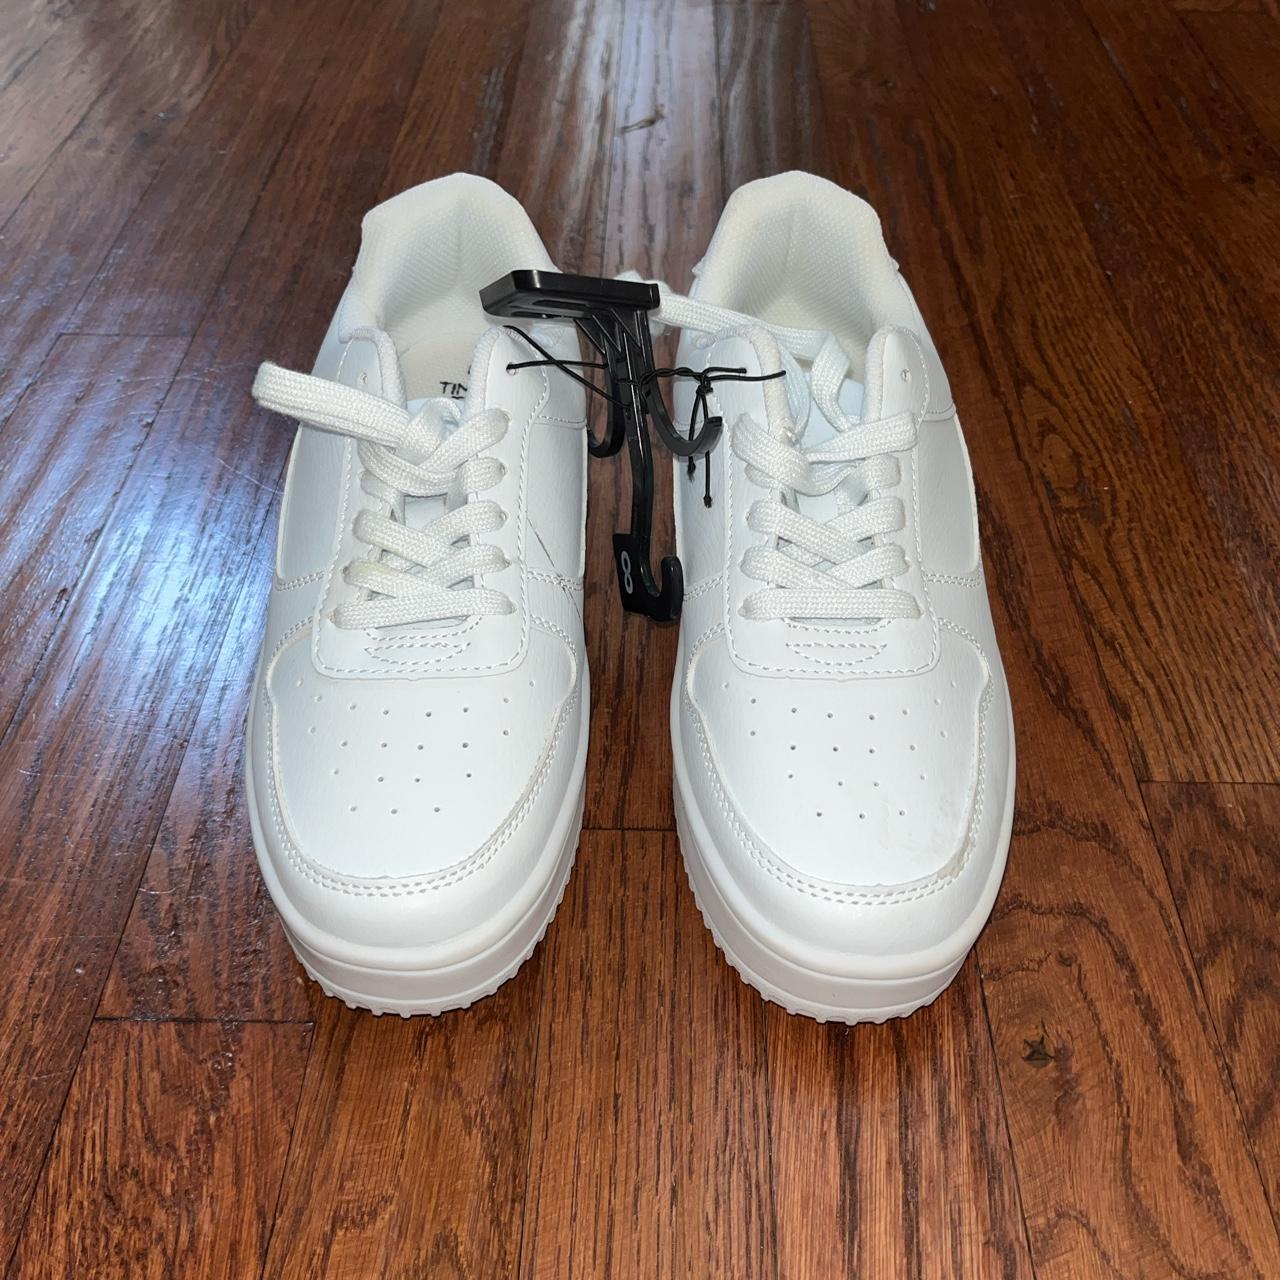 Never worn Air force 1 dupes from walmart I just... - Depop